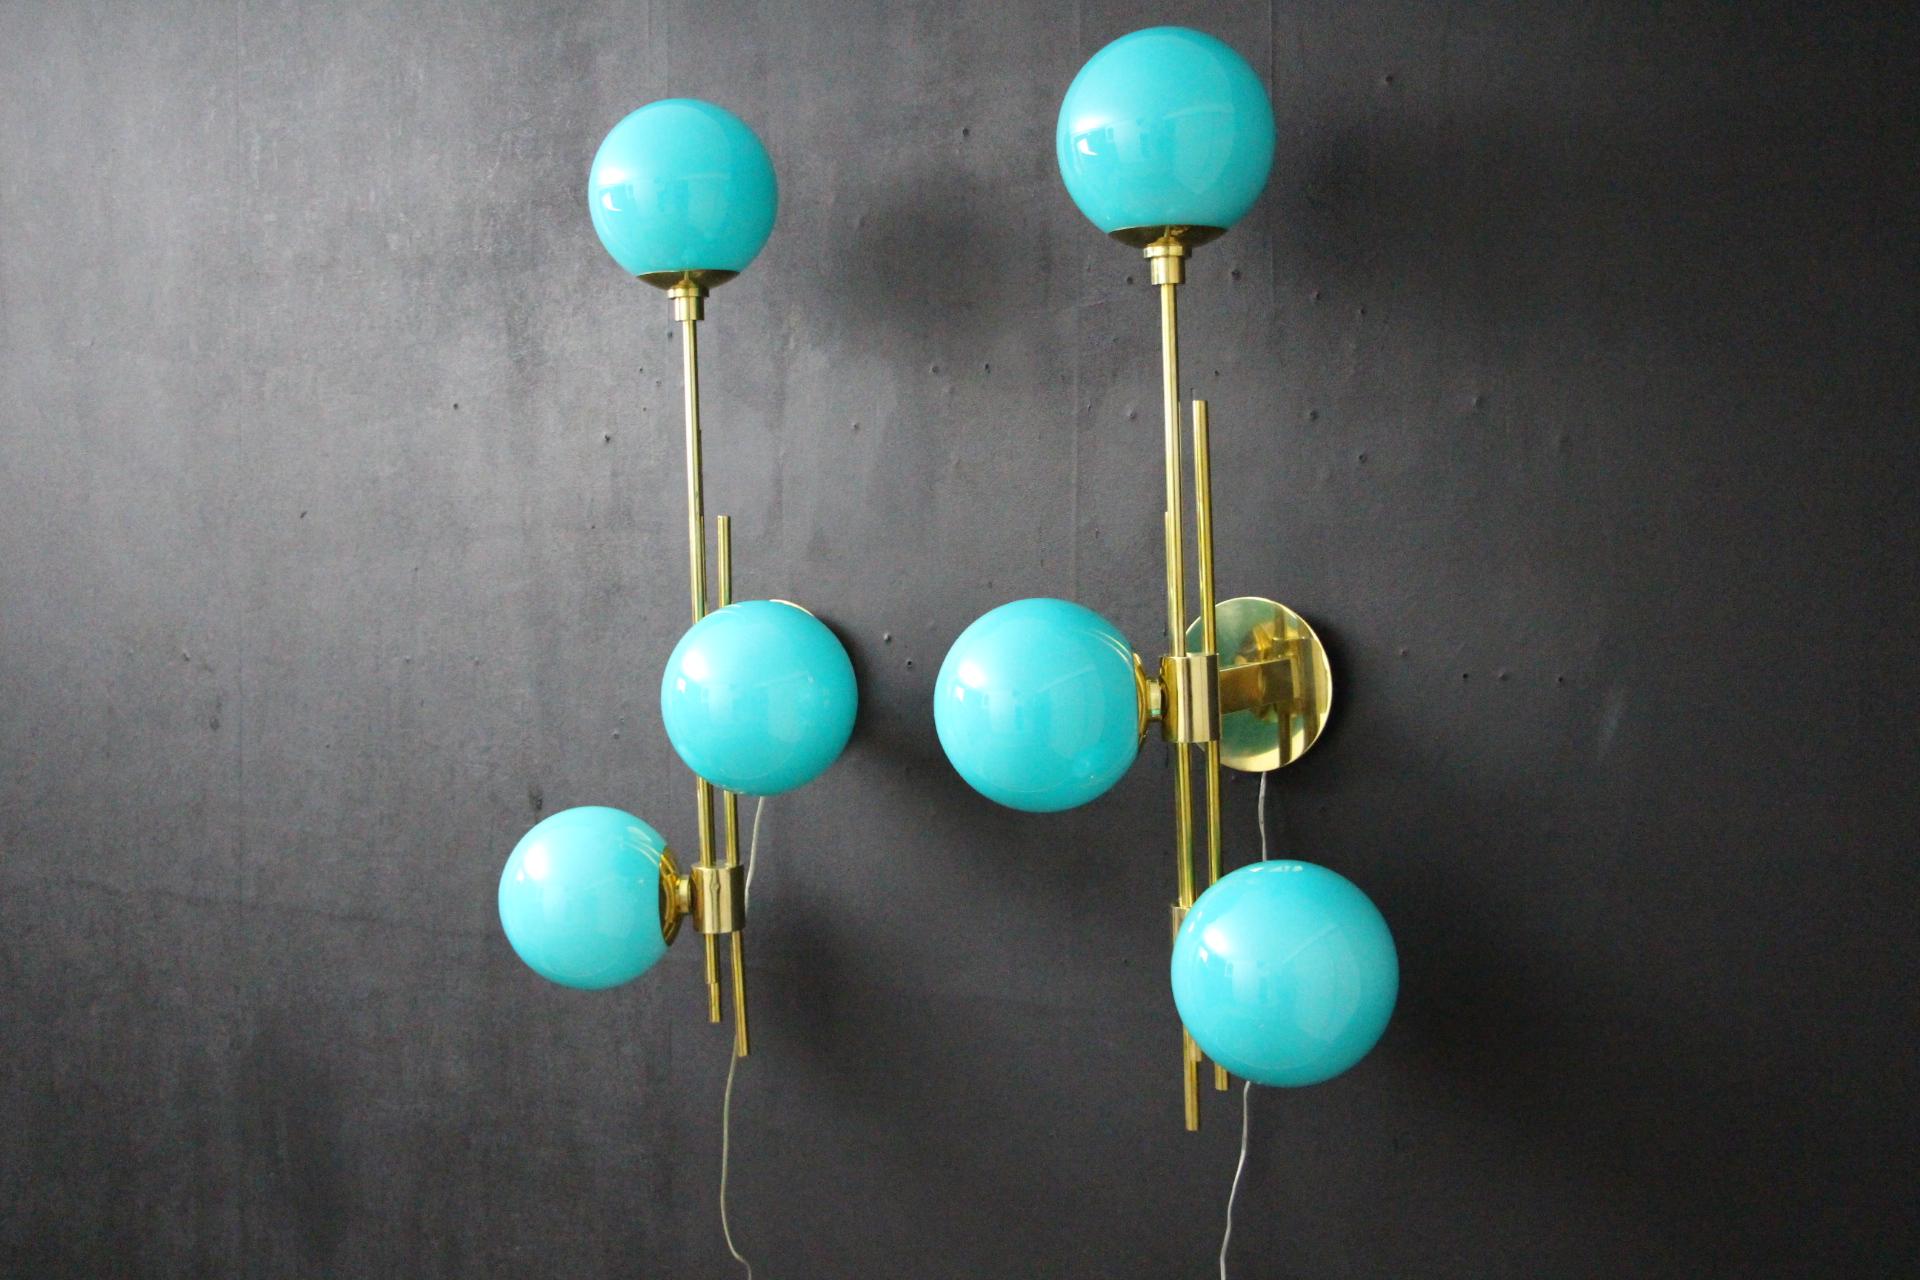 These sconces are very elegant with their brass frame and Tiffany blue Murano glass globes. They have got very unusual geometrical proportions and are absolutely gorgeous.
They could match with a very design interior or a typically mid century